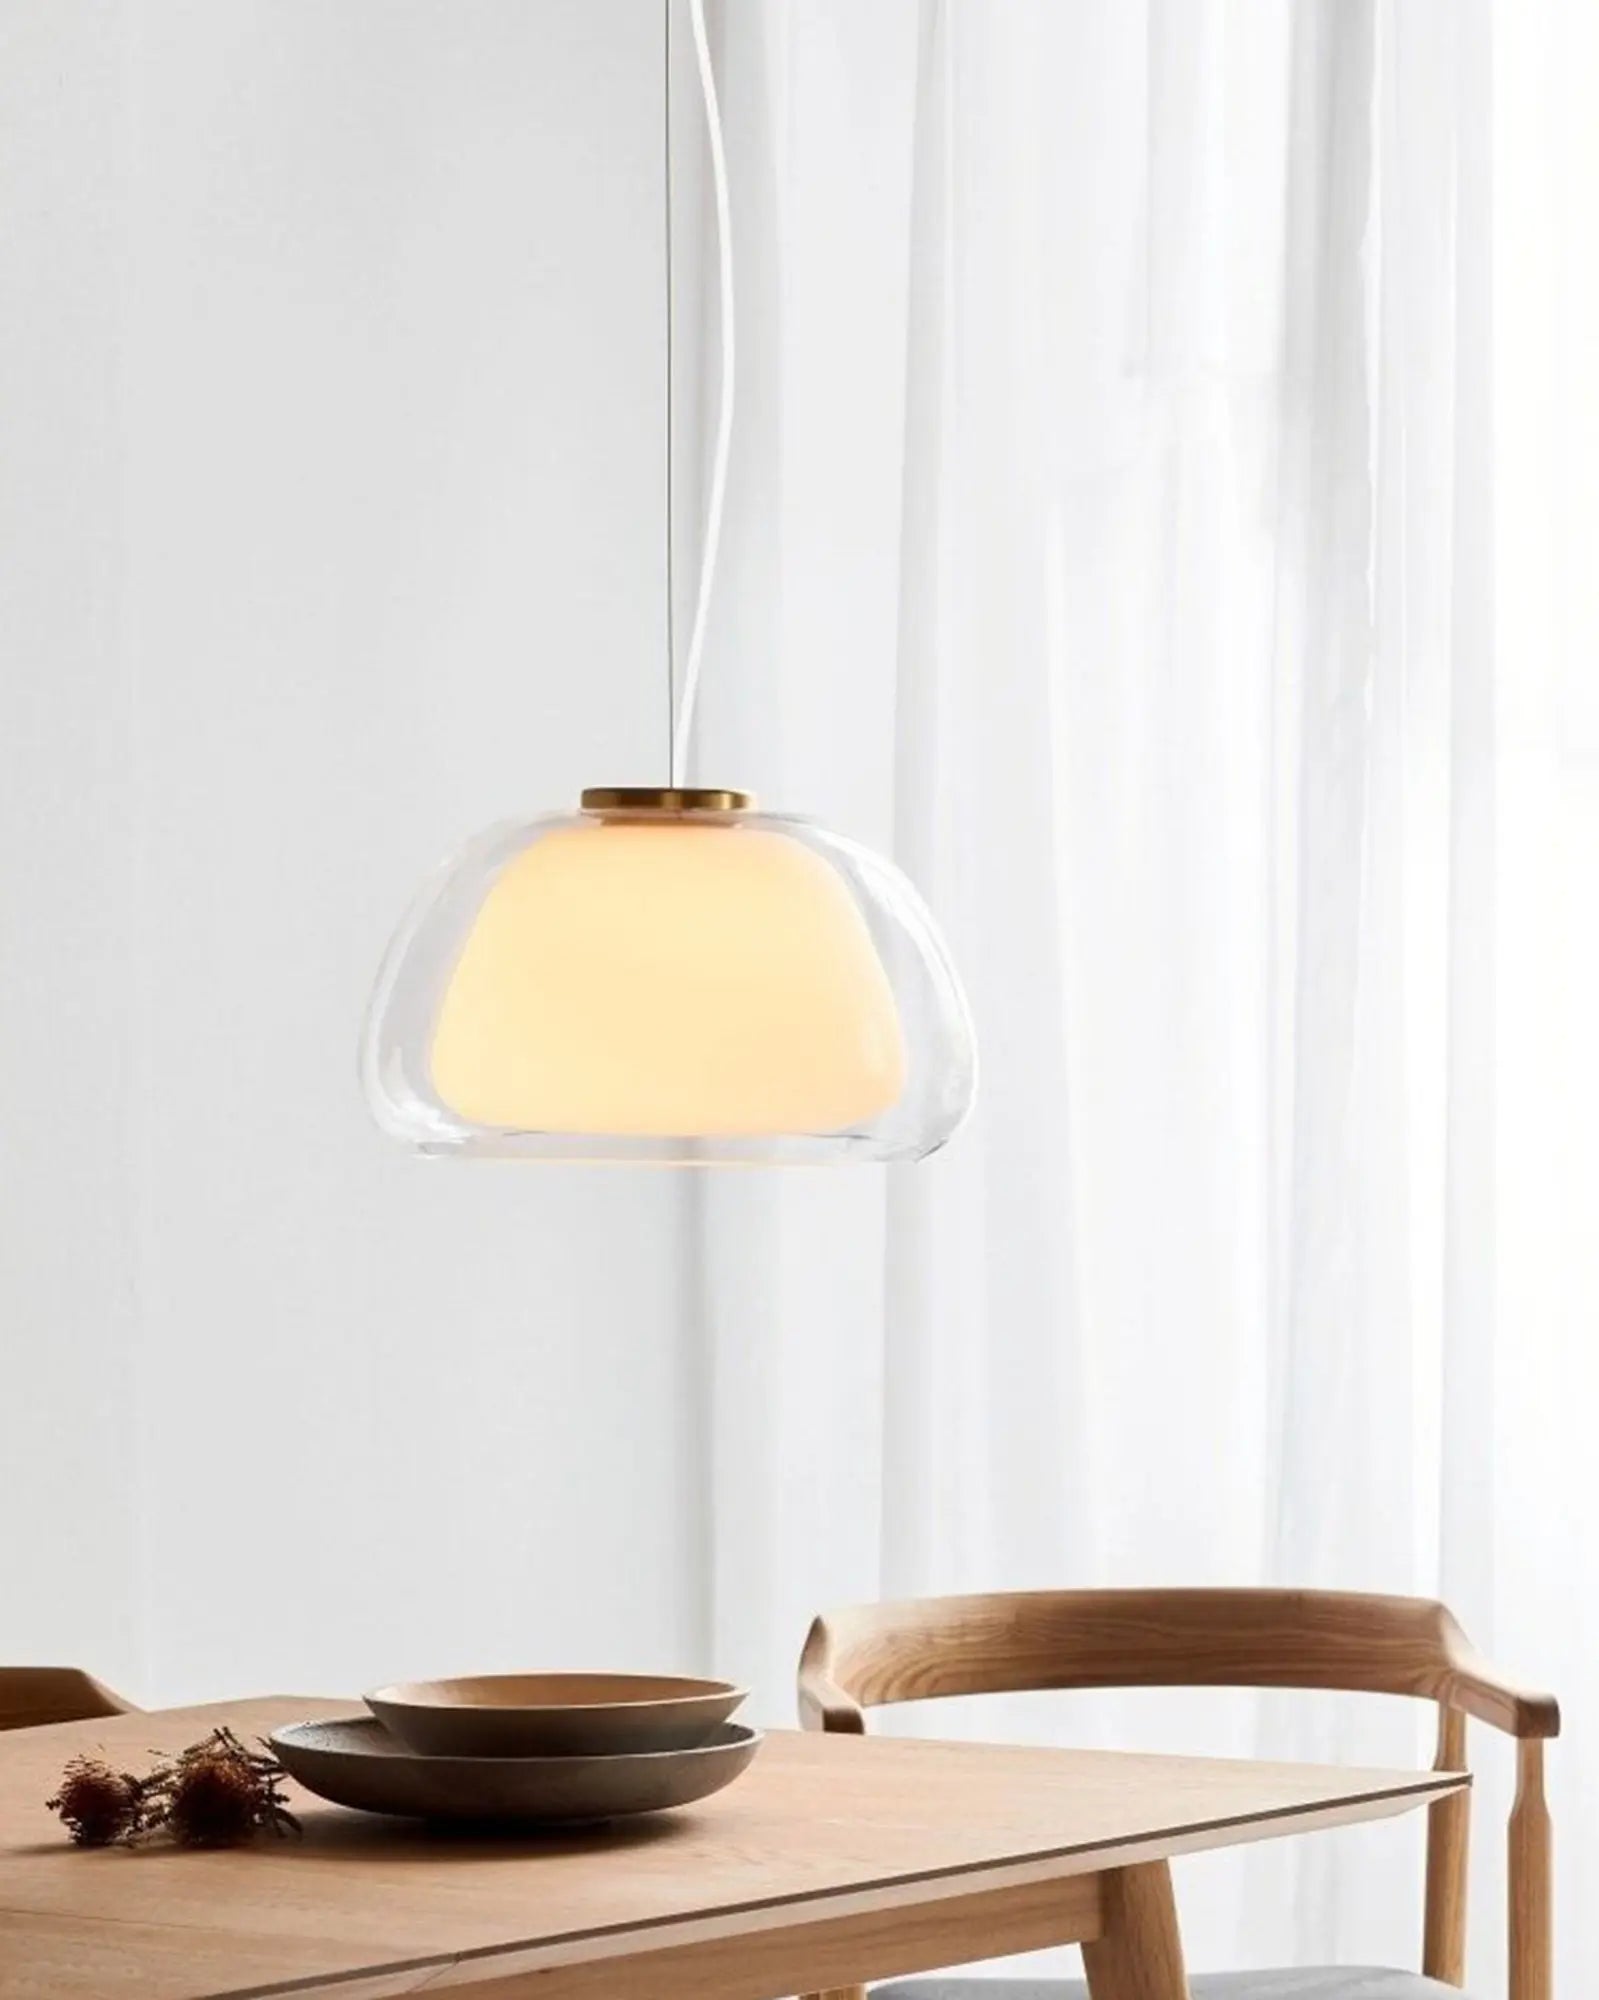 Jelly double glass pendant light above a dining table 